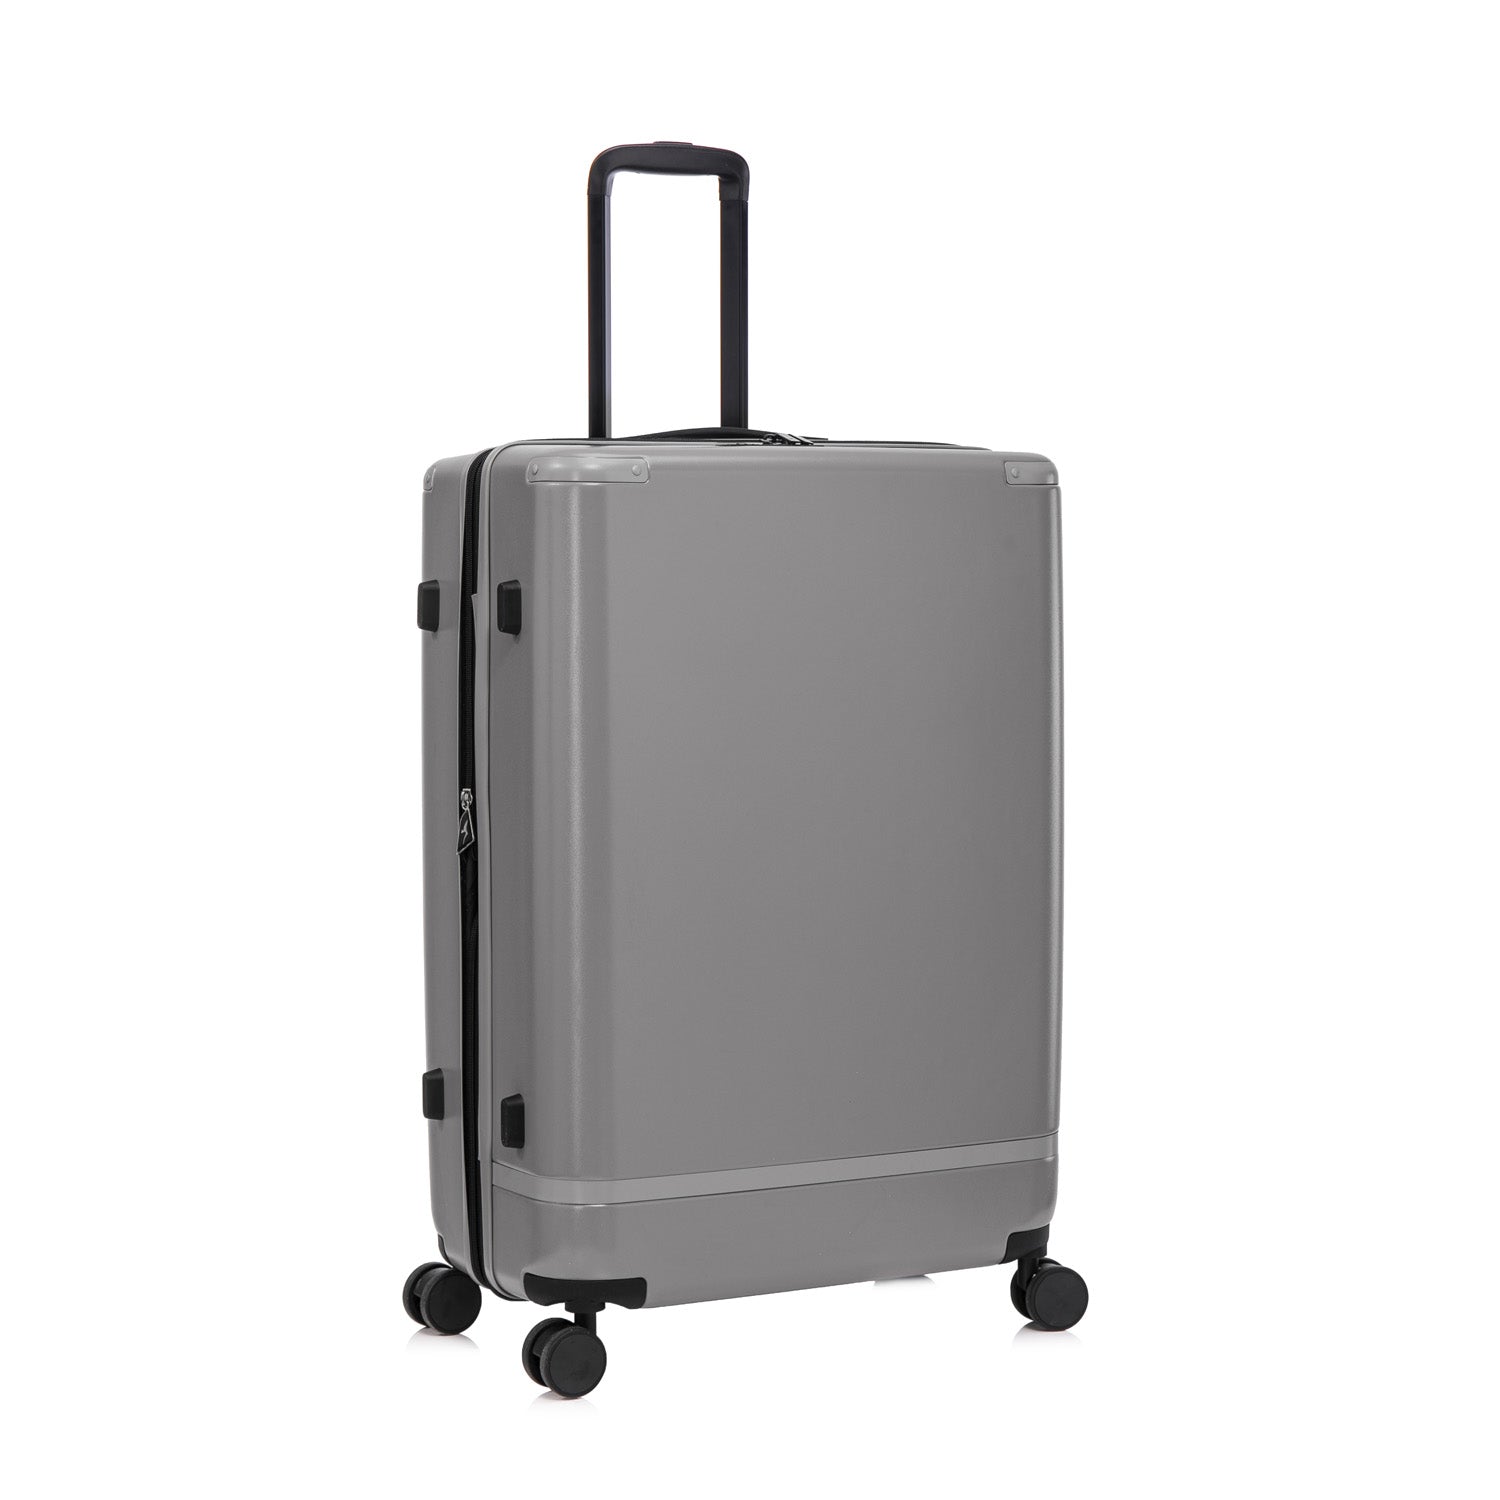 Qantas- QF250 ROME 76cm Large spinner suitcase - Charcoal-3